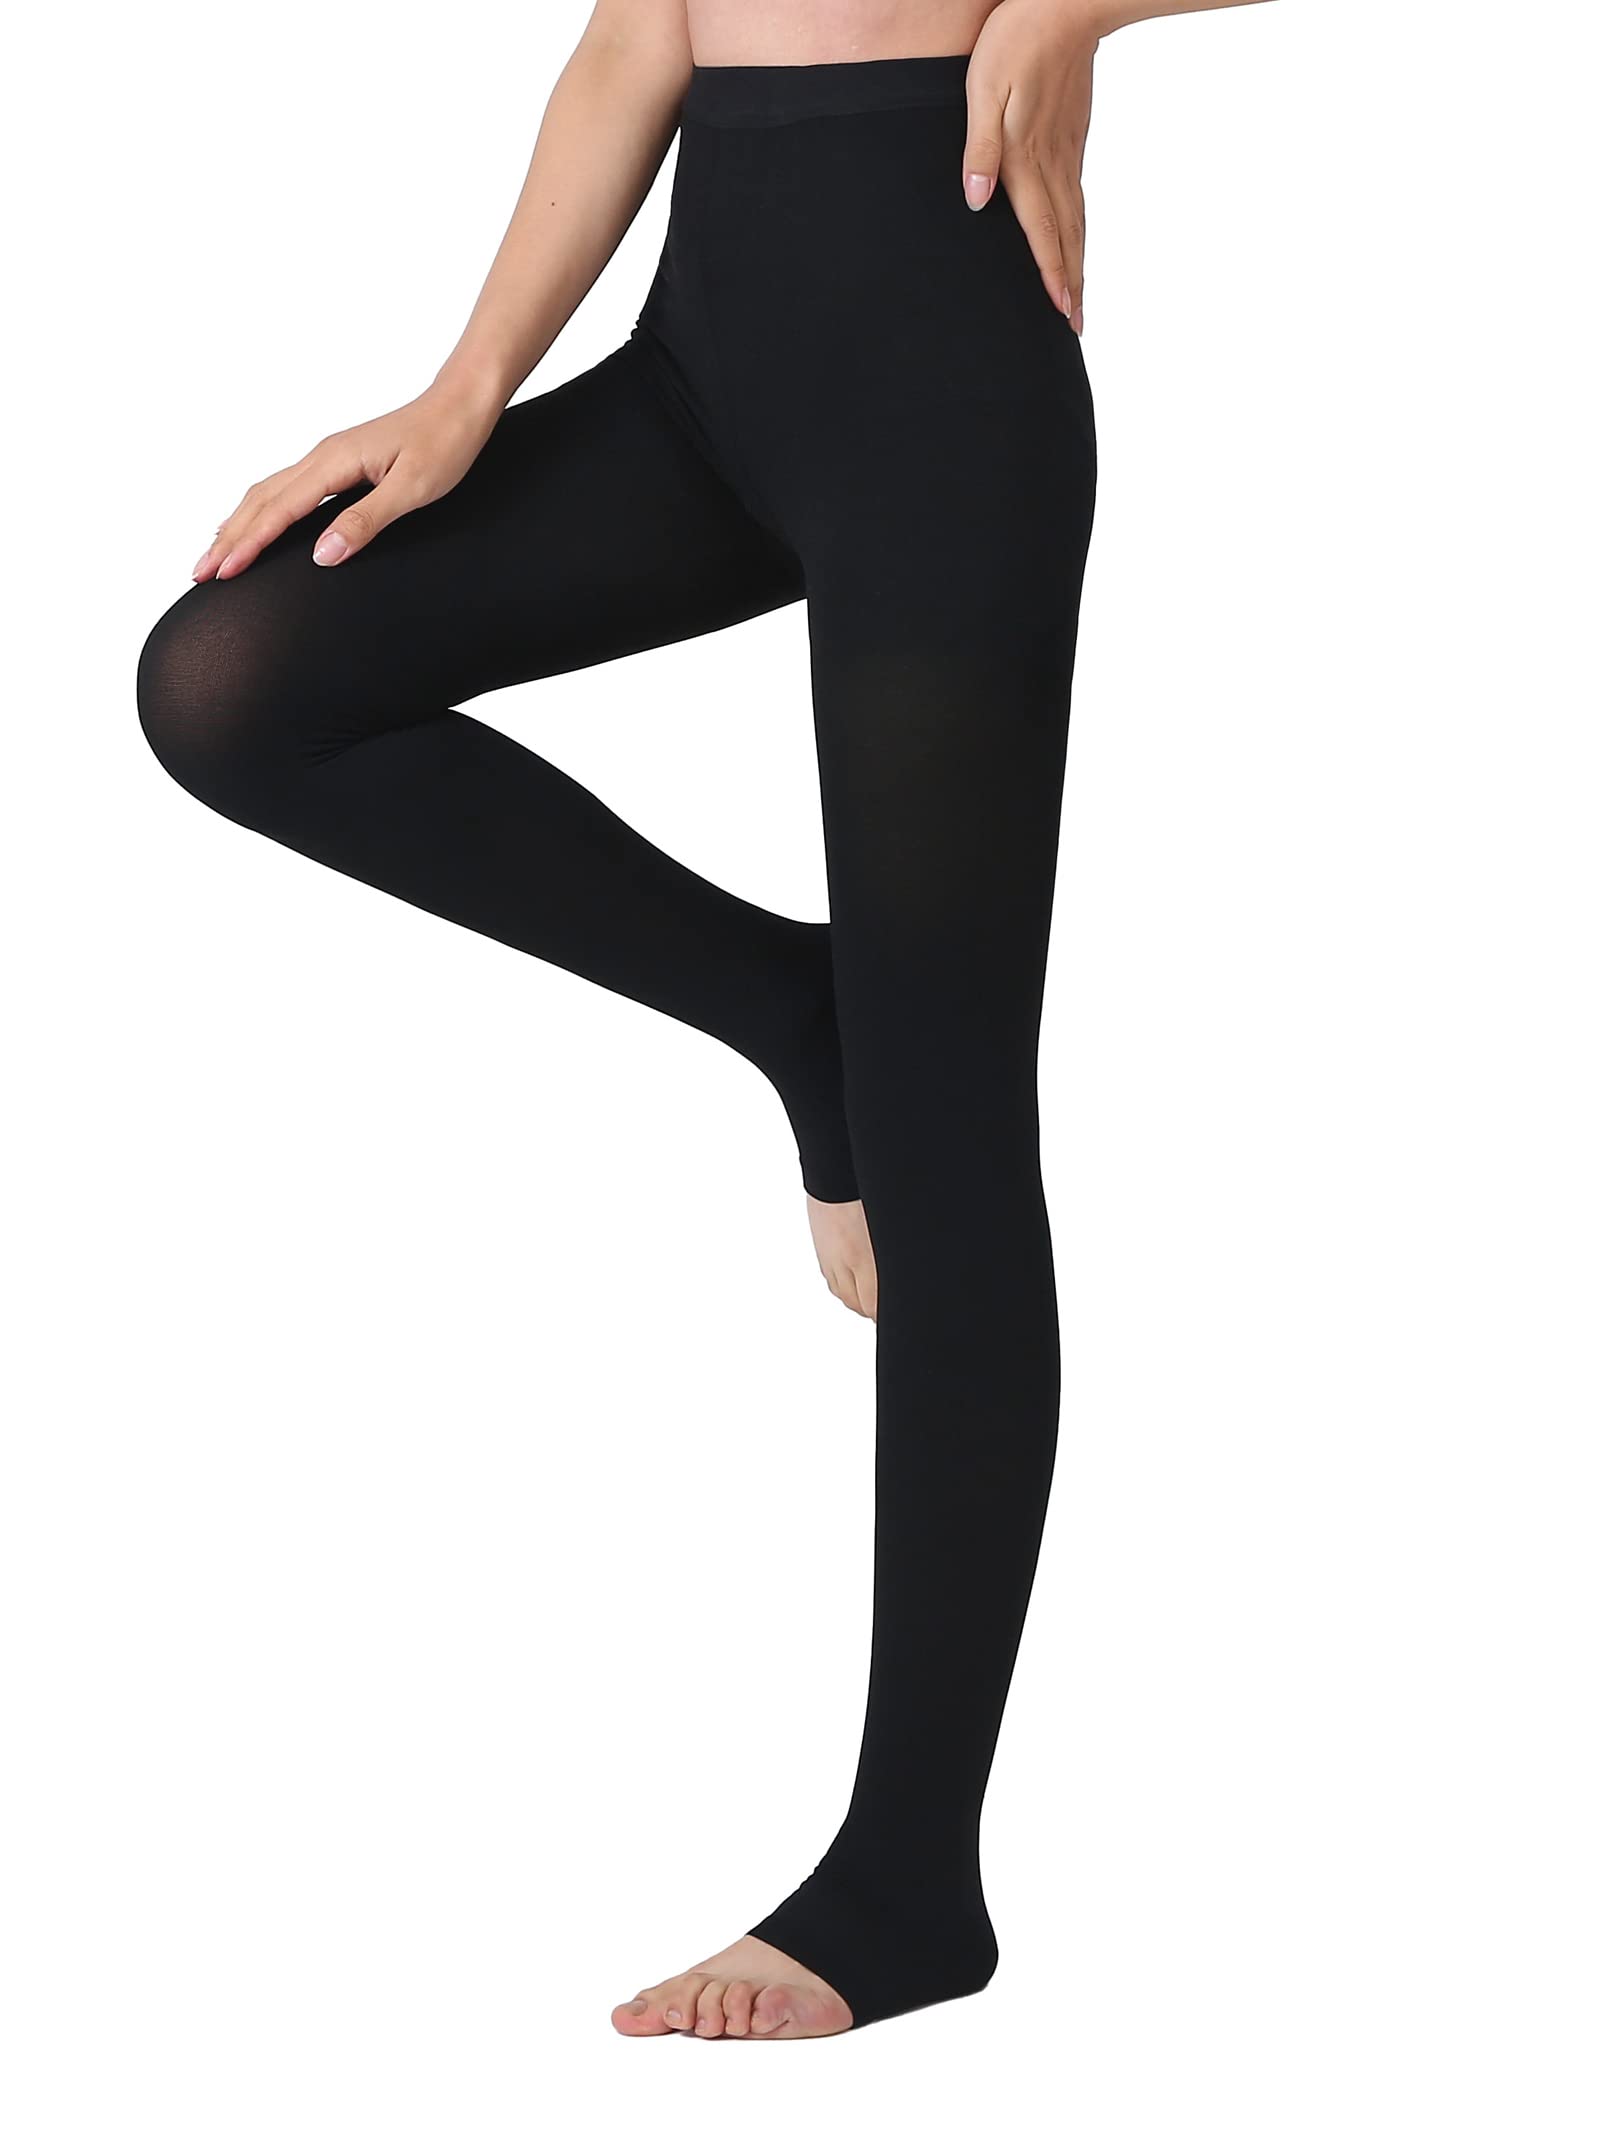 Compression Tights for Women 20-30 mmHg for Varicose Veins - Black, Small 